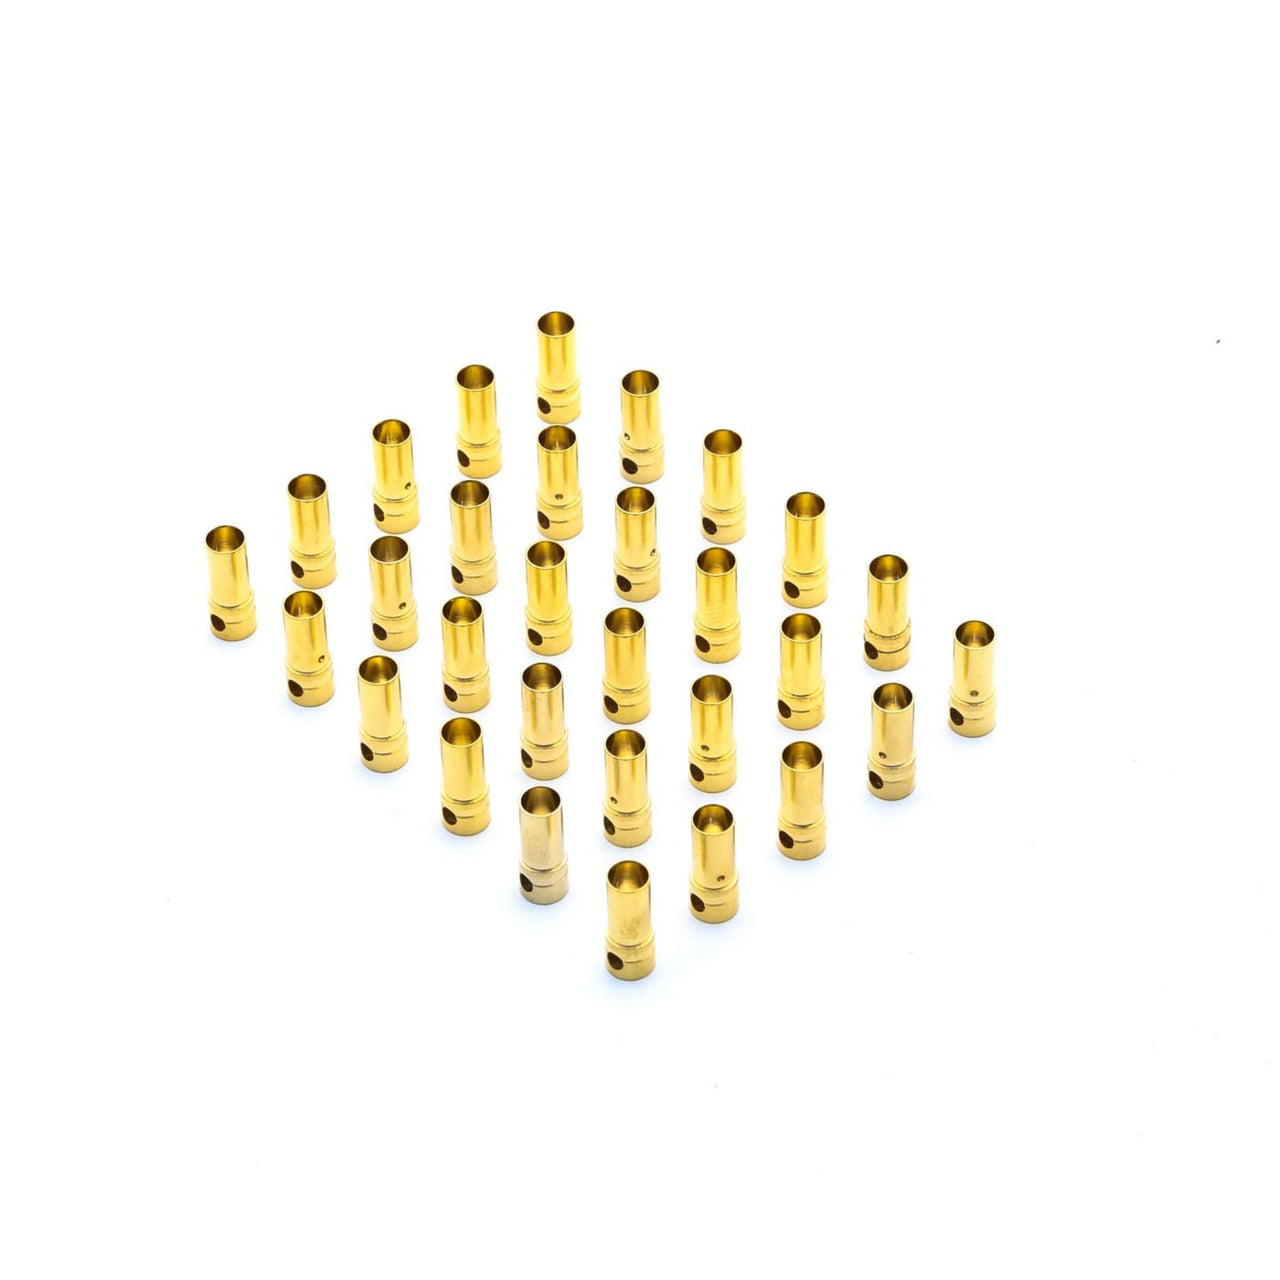 EFLAEC317 Gold Bullet Connector, Female, 3.5mm (30)